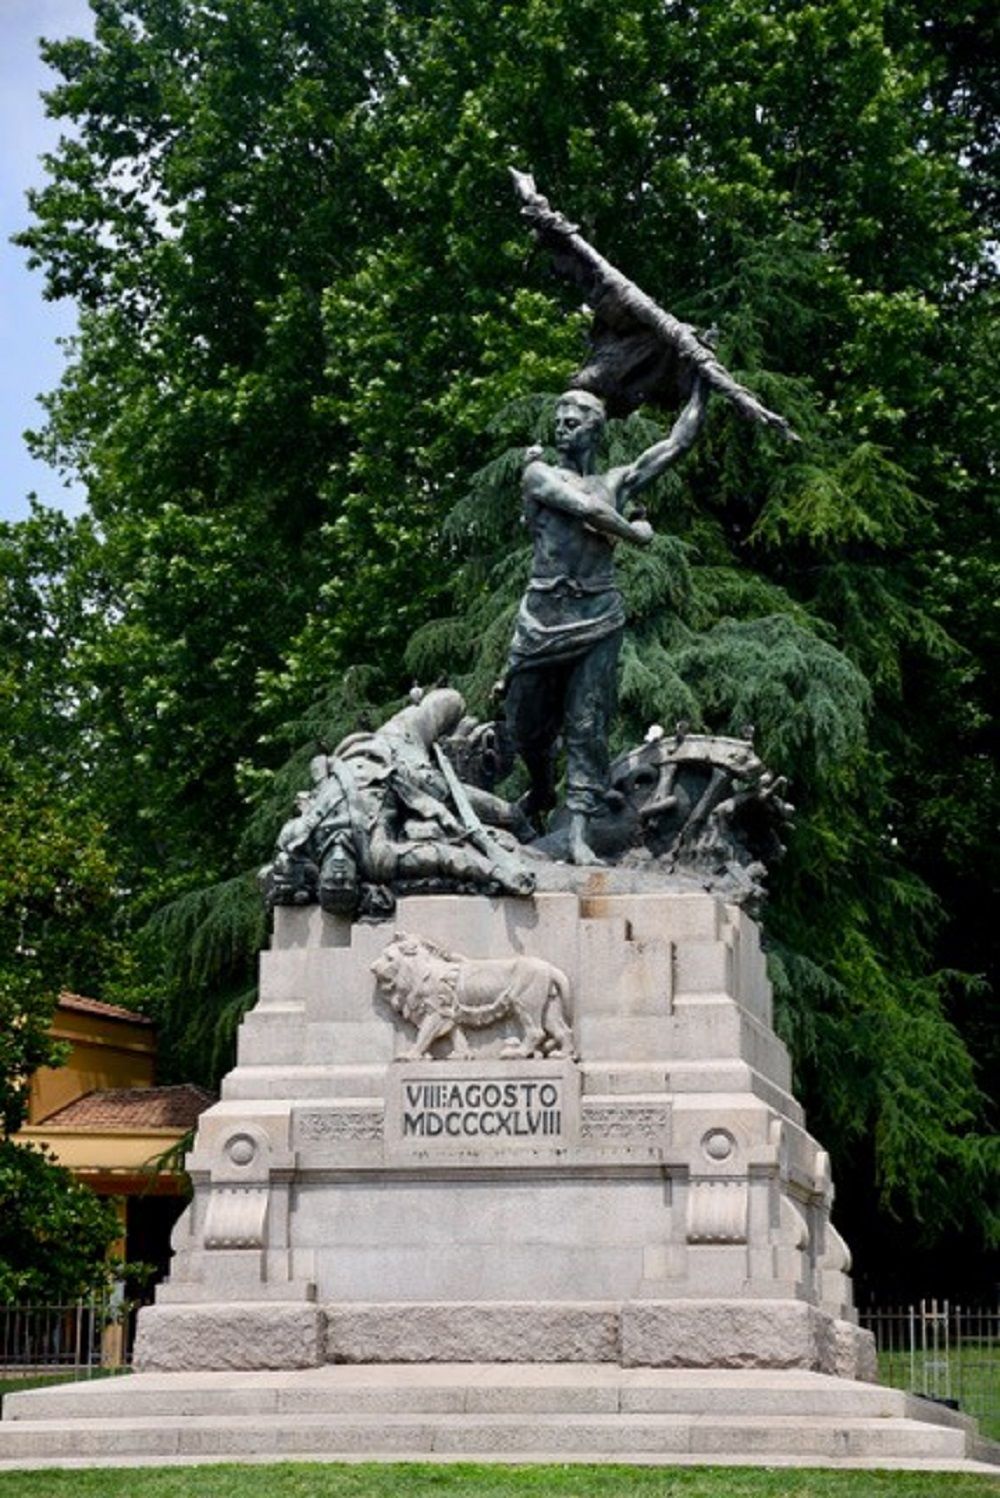 Monument To The Fallen On 8th August 1848 Bologna #2